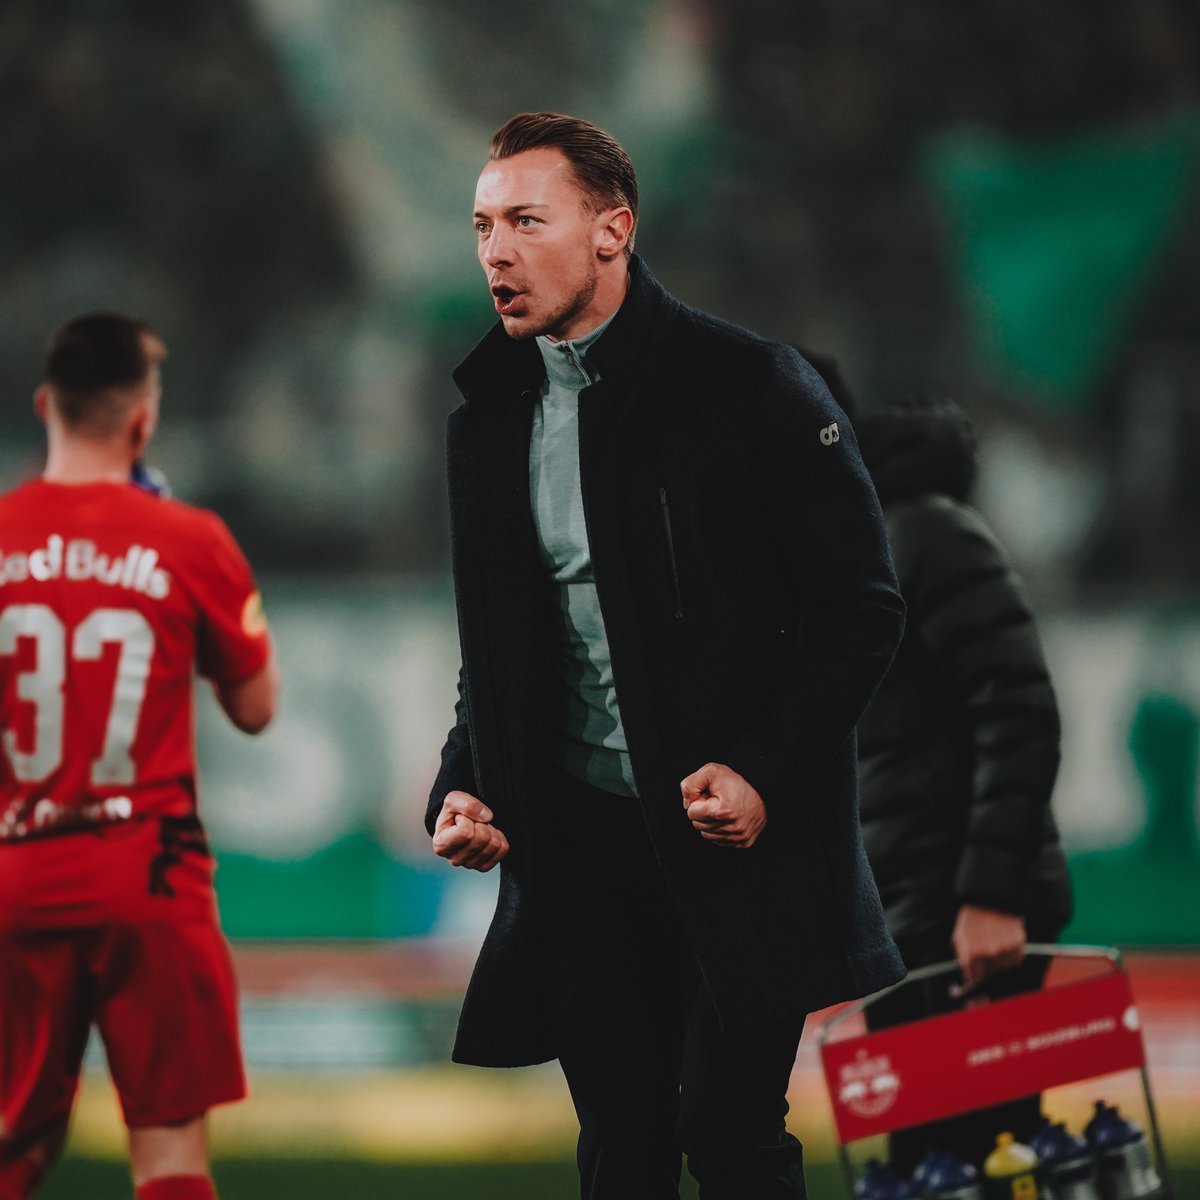 Matthias Jaissle has led Red Bull Salzburg to a 20-game unbeaten run in the league. At 34 years old, he was the youngest manager in European competition this season.

Red Bull Salzburg pay a £0 fine each time Jaissle manages because he has his UEFA Pro License 🤯